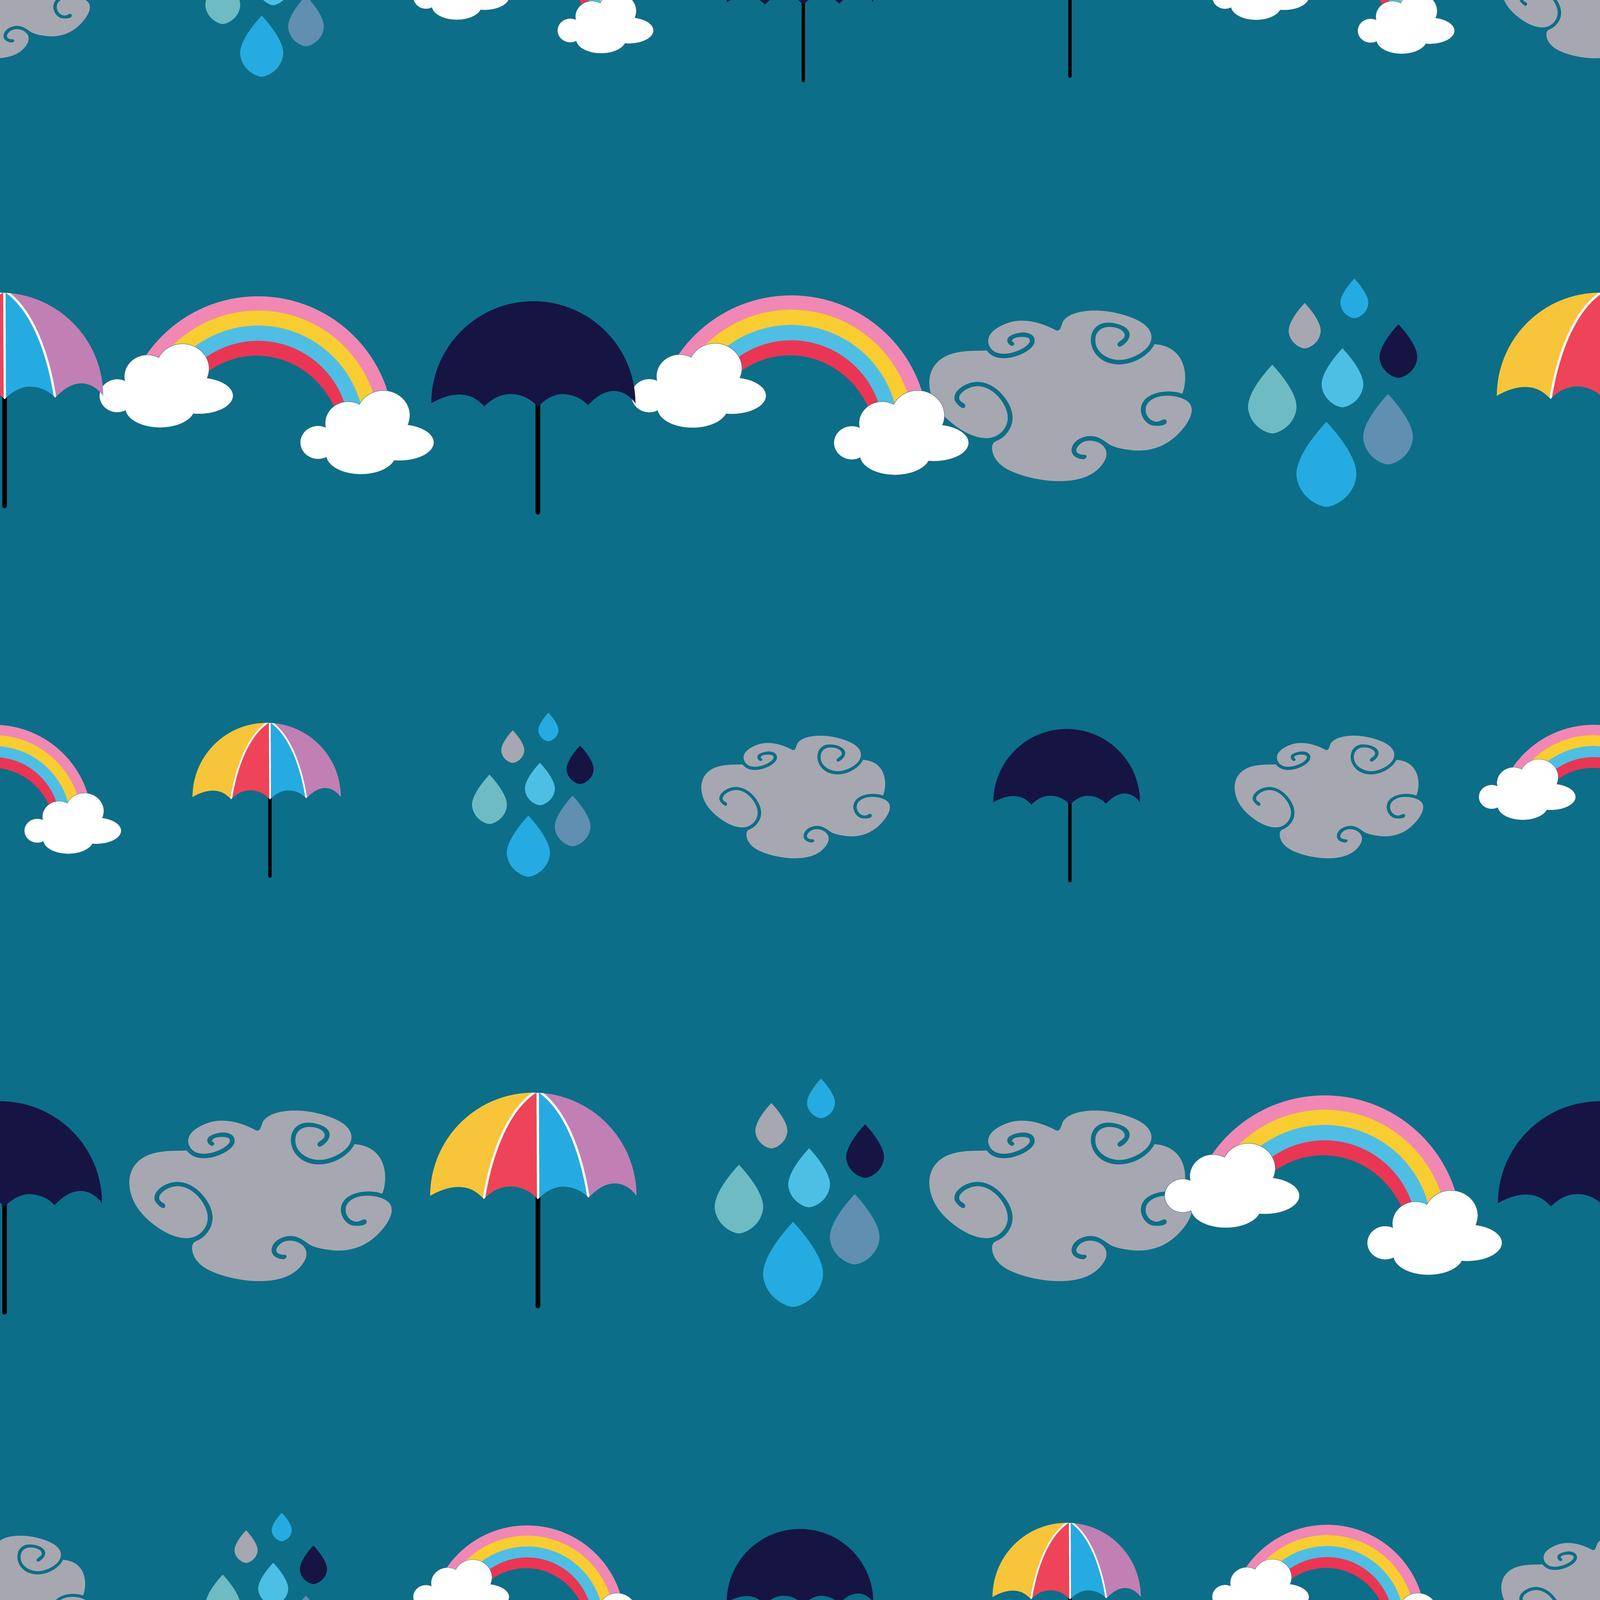 Rainy weather seamless pattern design on turquoise background by elinnet